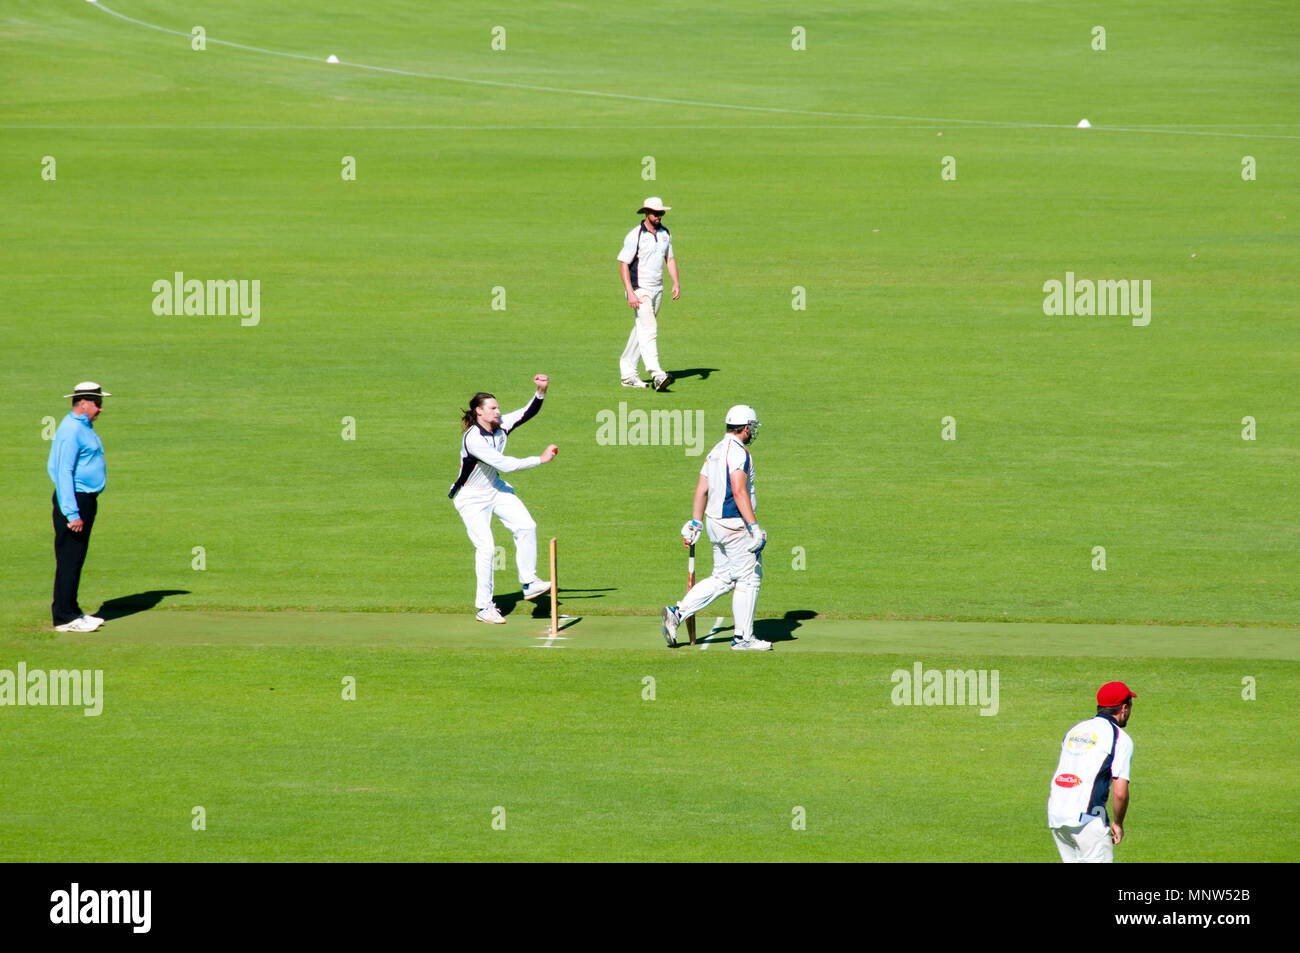 PERTH, AUSTRALIA - February 10, 2018: Outdoors recreational cricket game played in park Stock Photo